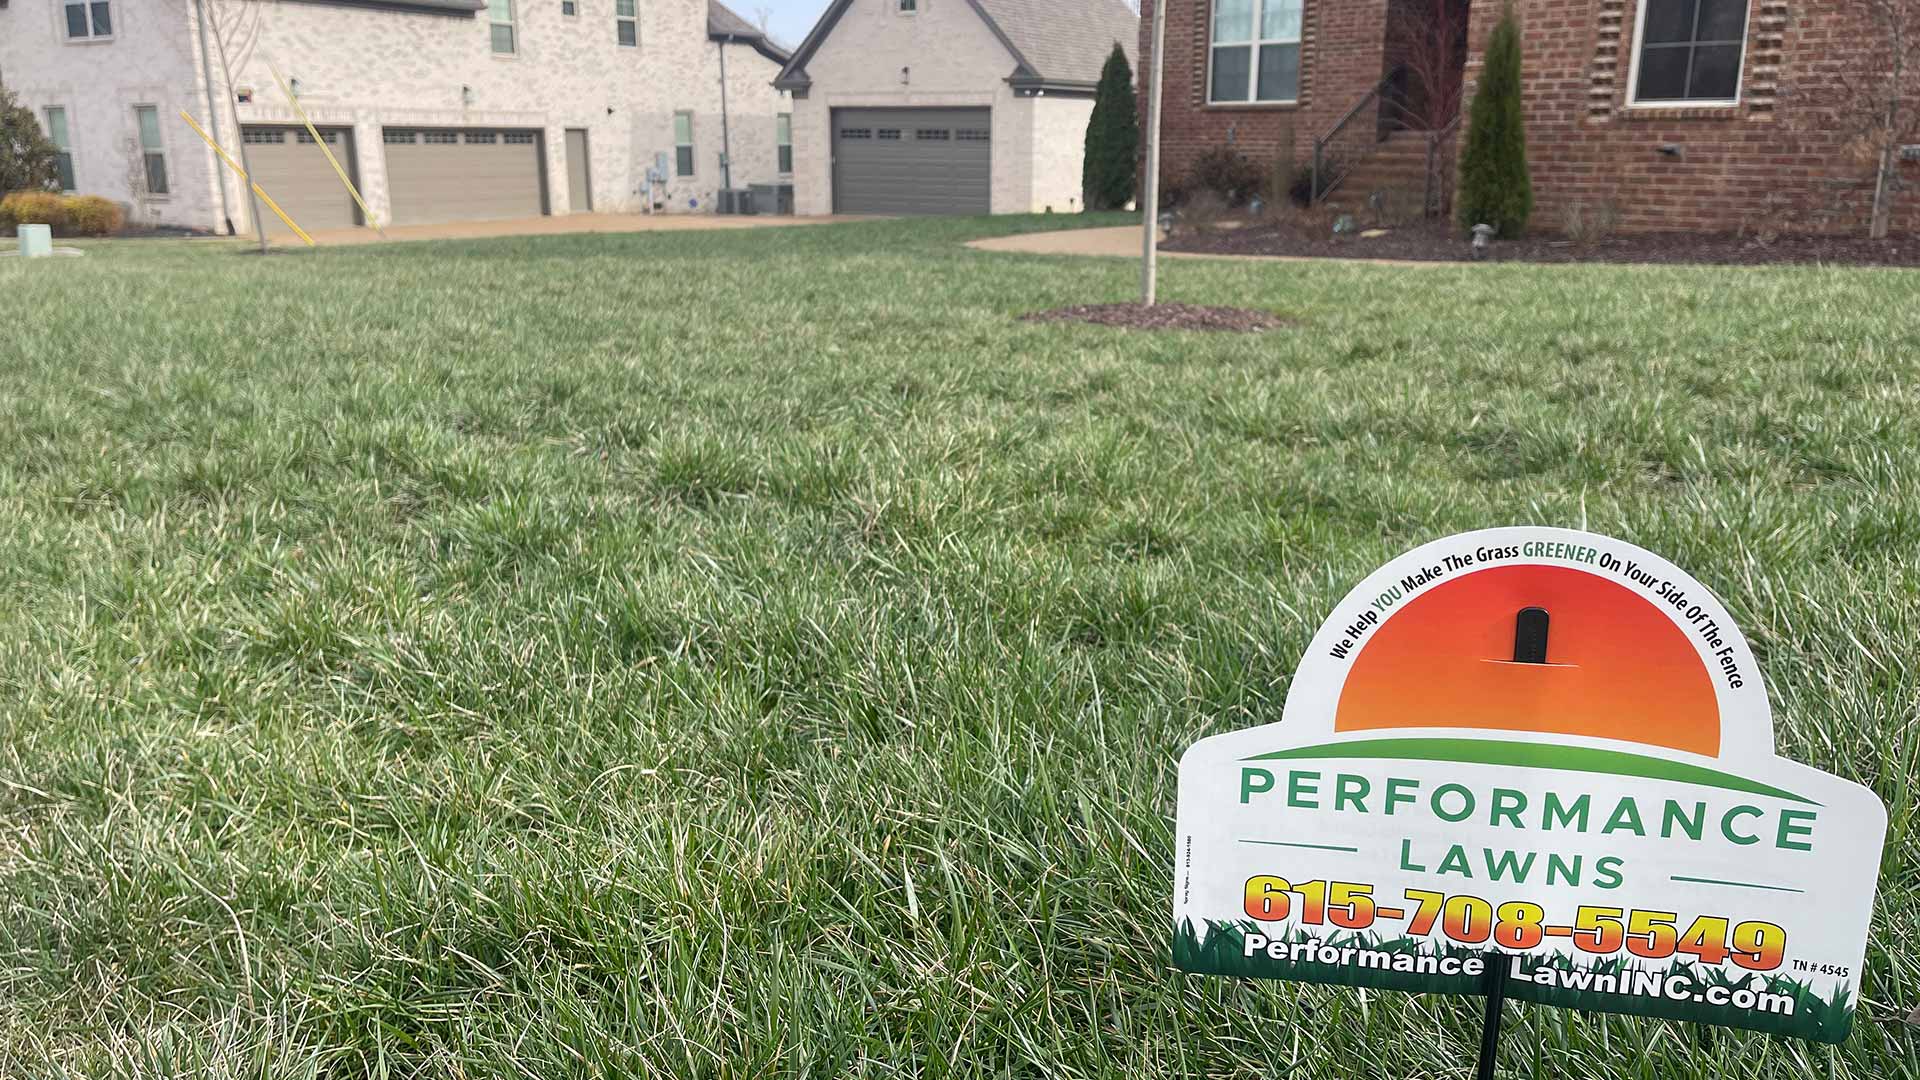 Branding signage added to a lawn after services performed in Gallatin, TN.